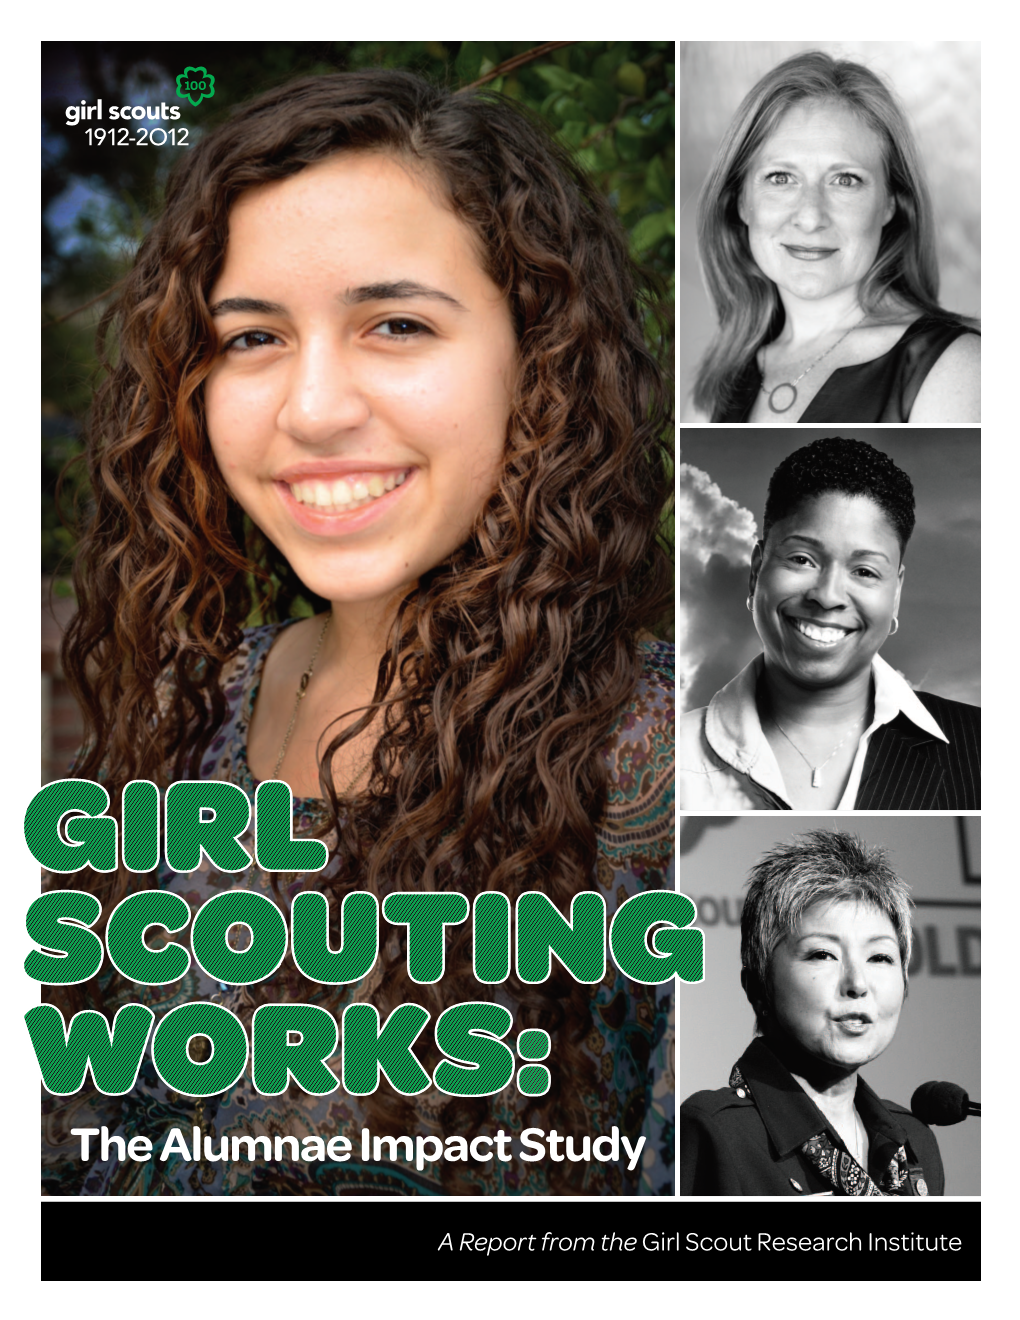 Girl Scouting Works: the Alumnae Impact Study Achieving Success in Everything from Technology and Science to Business and Industry